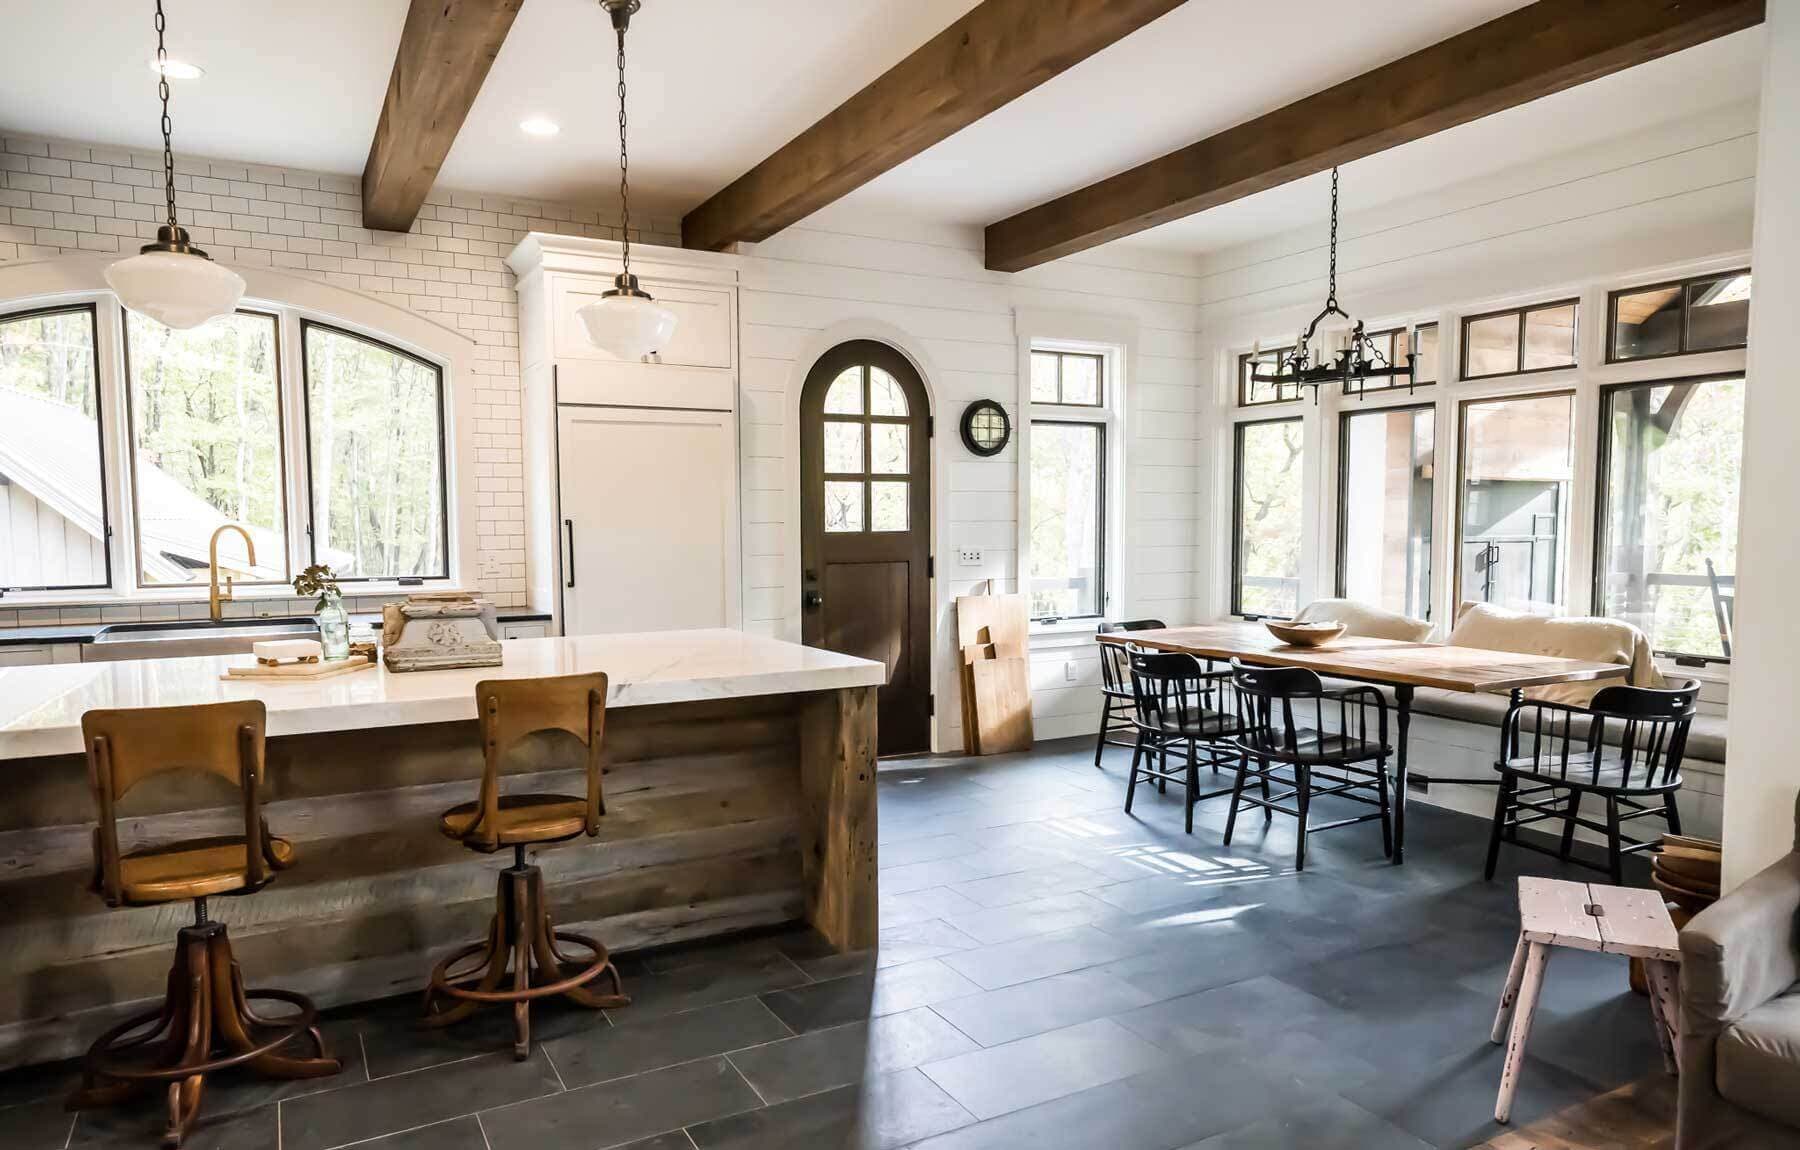 Rustic circular sawn reclaimed wood box beams installed in kitchen and dining ceilings.